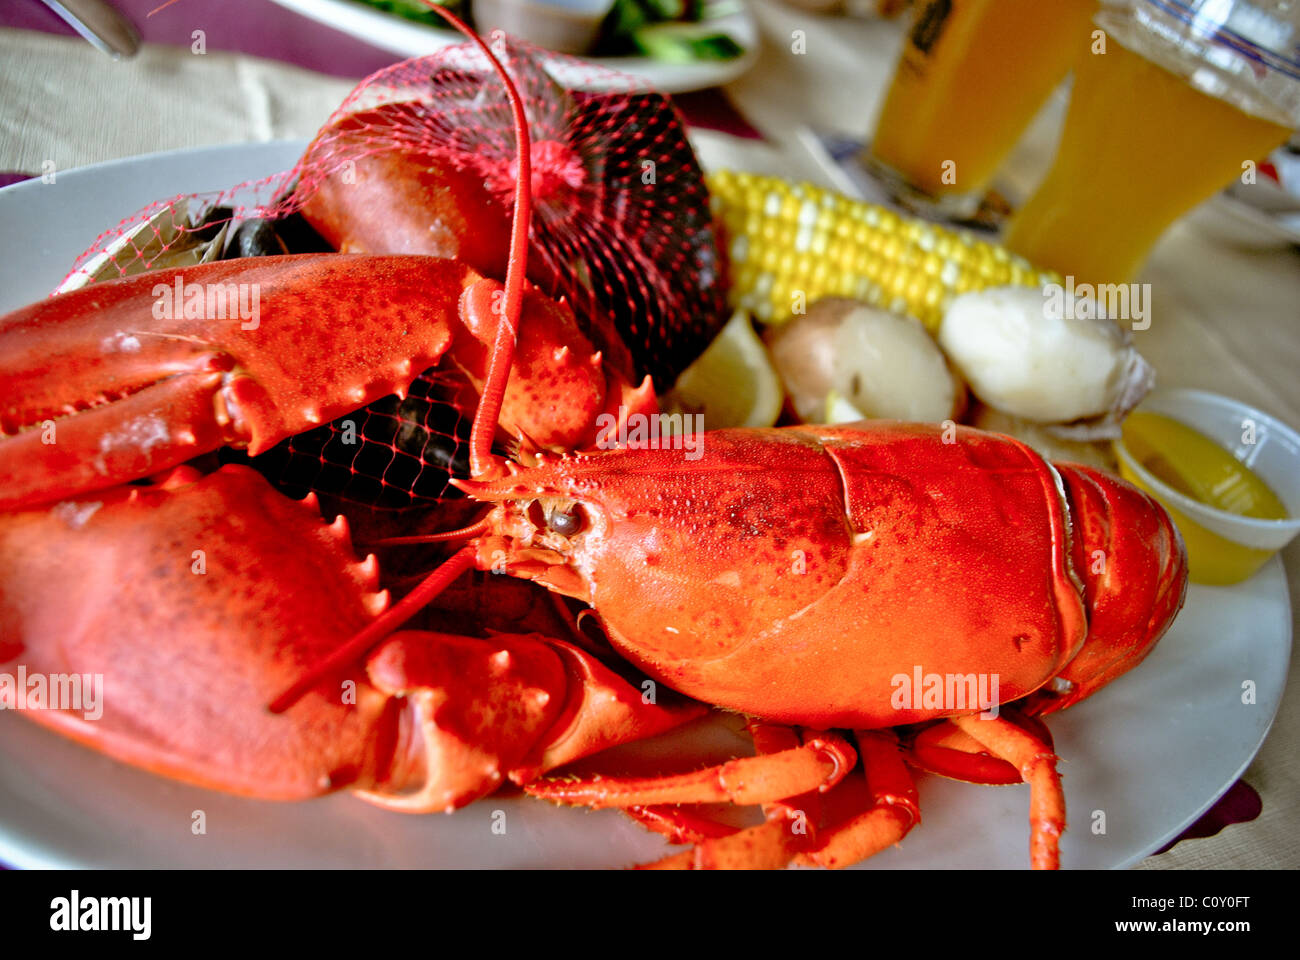 Cooked lobster with clams, corn and beer. Stock Photo